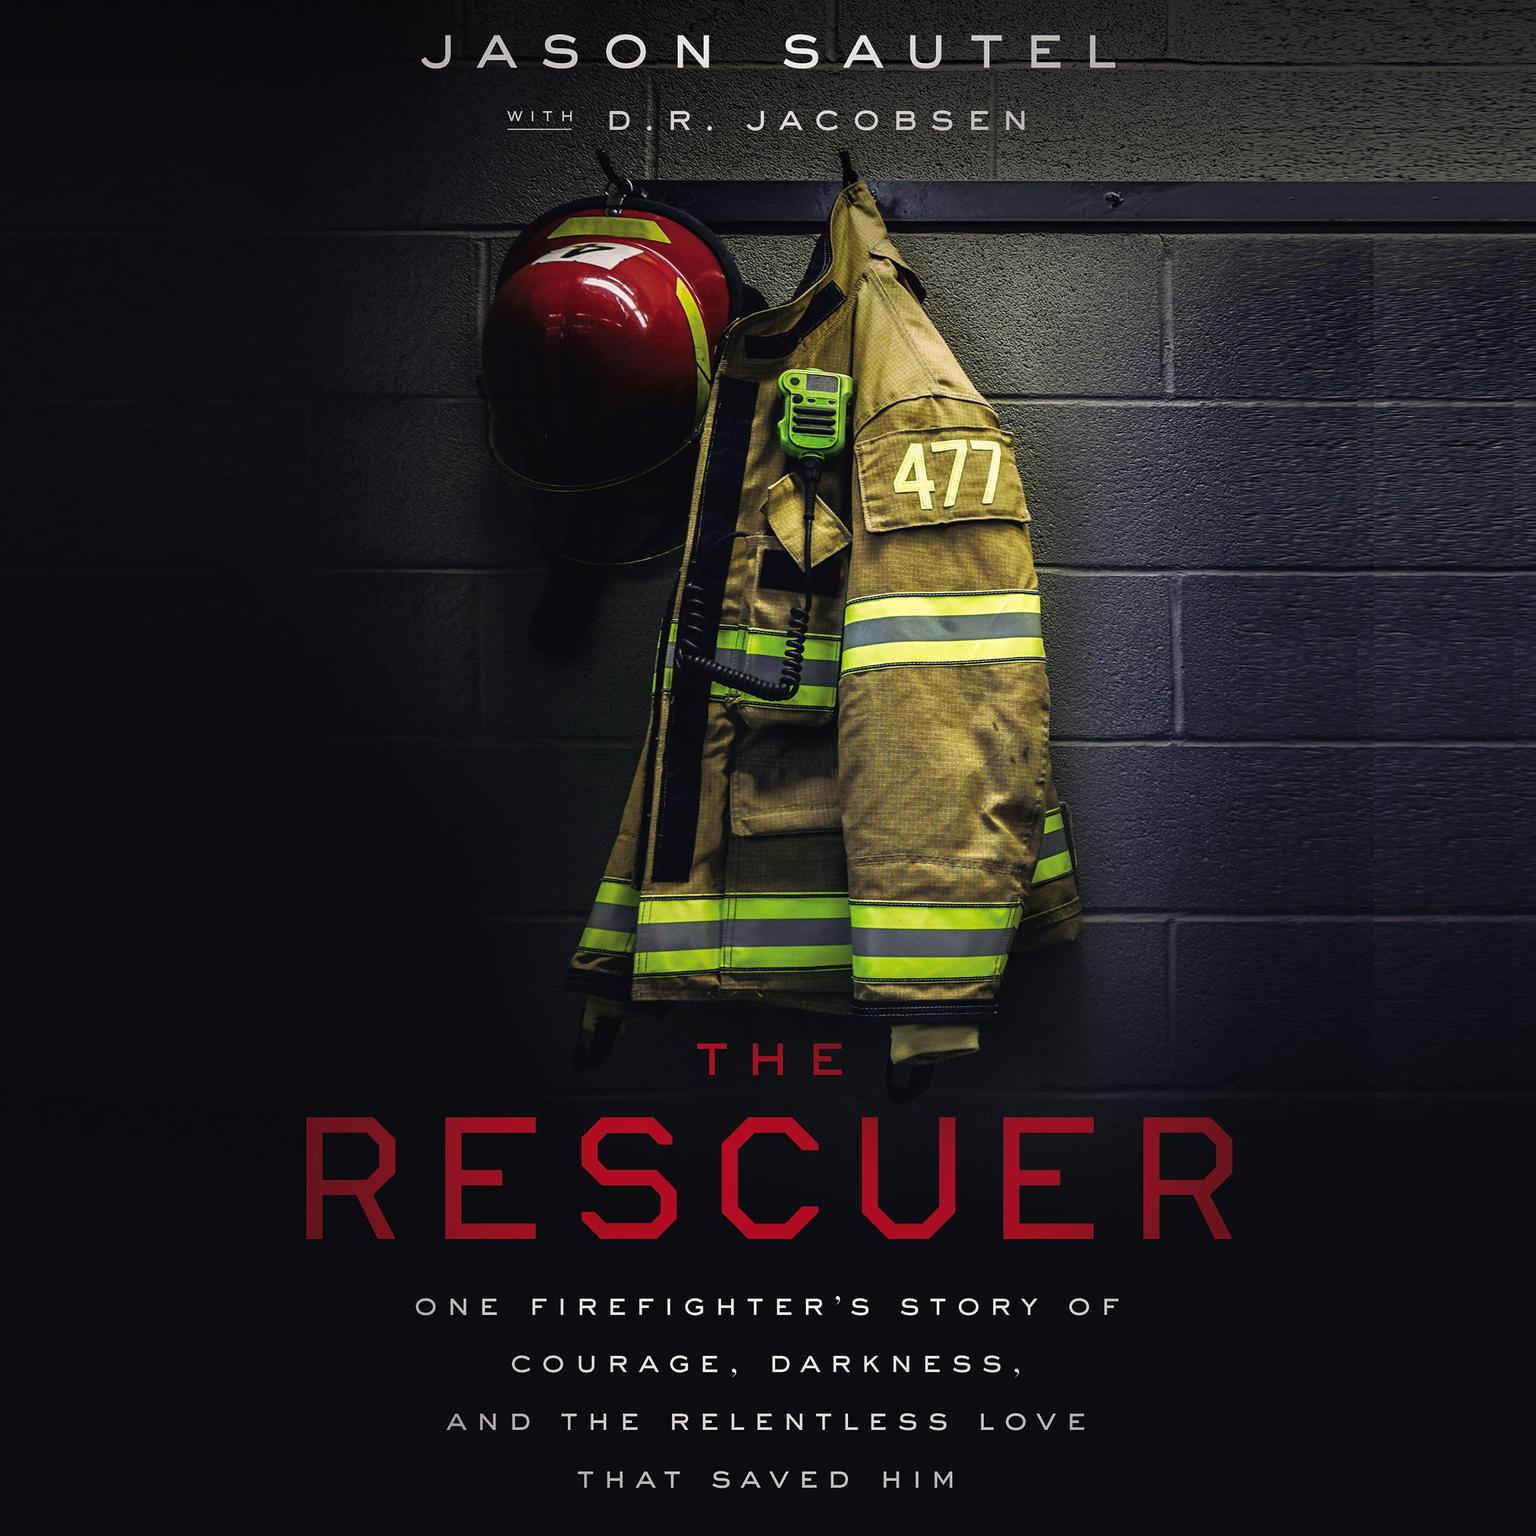 The Rescuer: One Firefighter’s Story of Courage, Darkness, and the Relentless Love That Saved Him Audiobook, by Jason Sautel